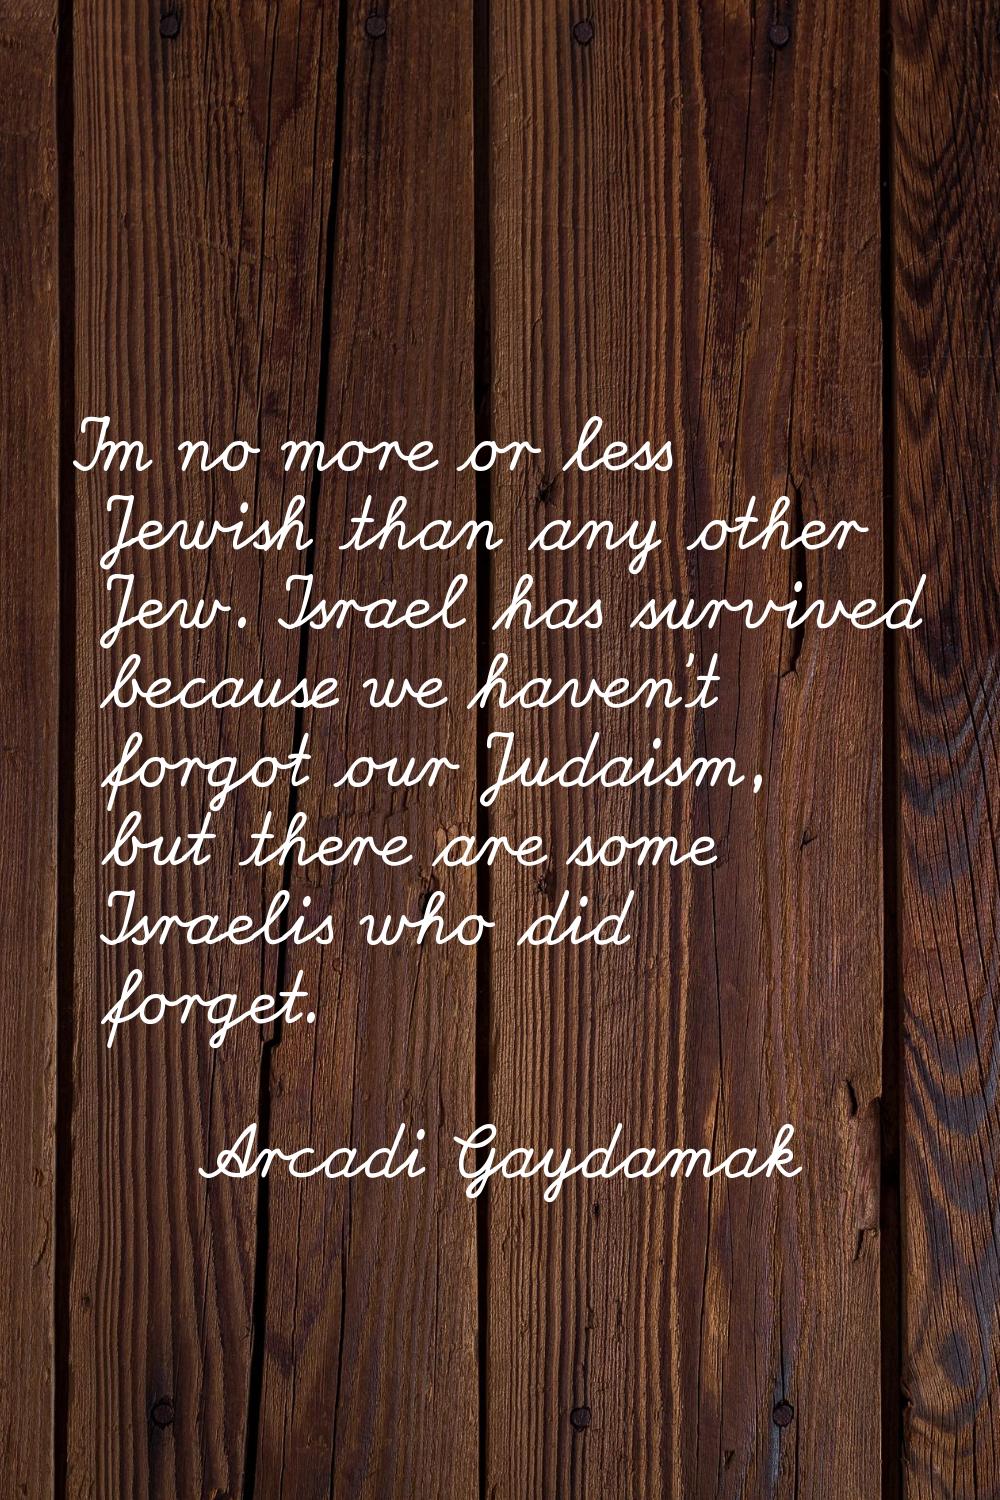 I'm no more or less Jewish than any other Jew. Israel has survived because we haven't forgot our Ju